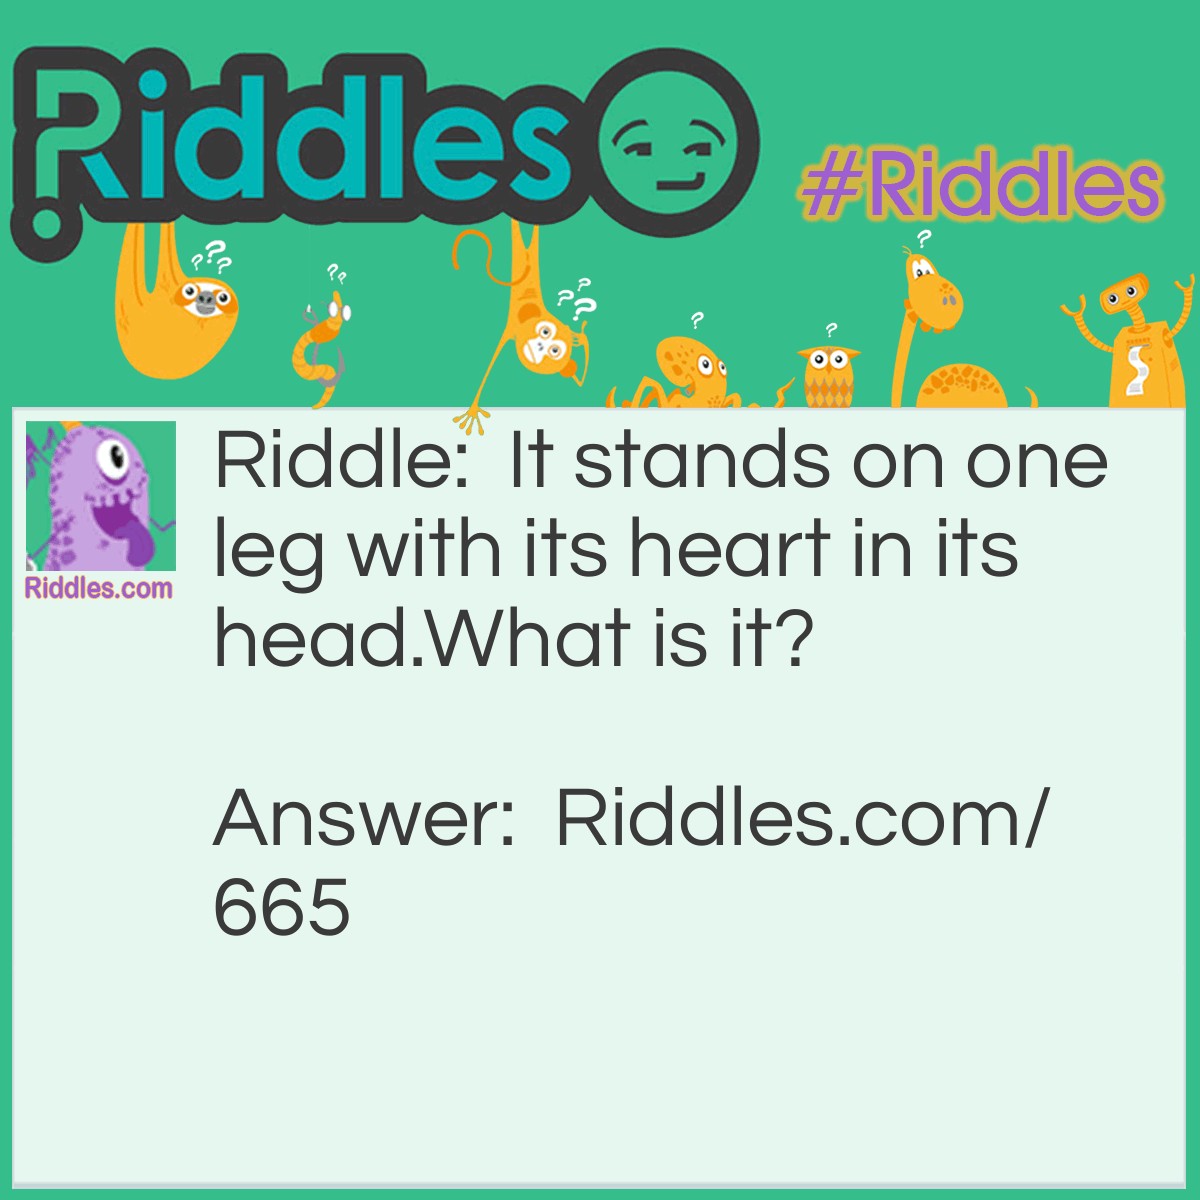 Riddle: It stands on one leg with its heart in its head.
What is it? Answer: Cabbage.